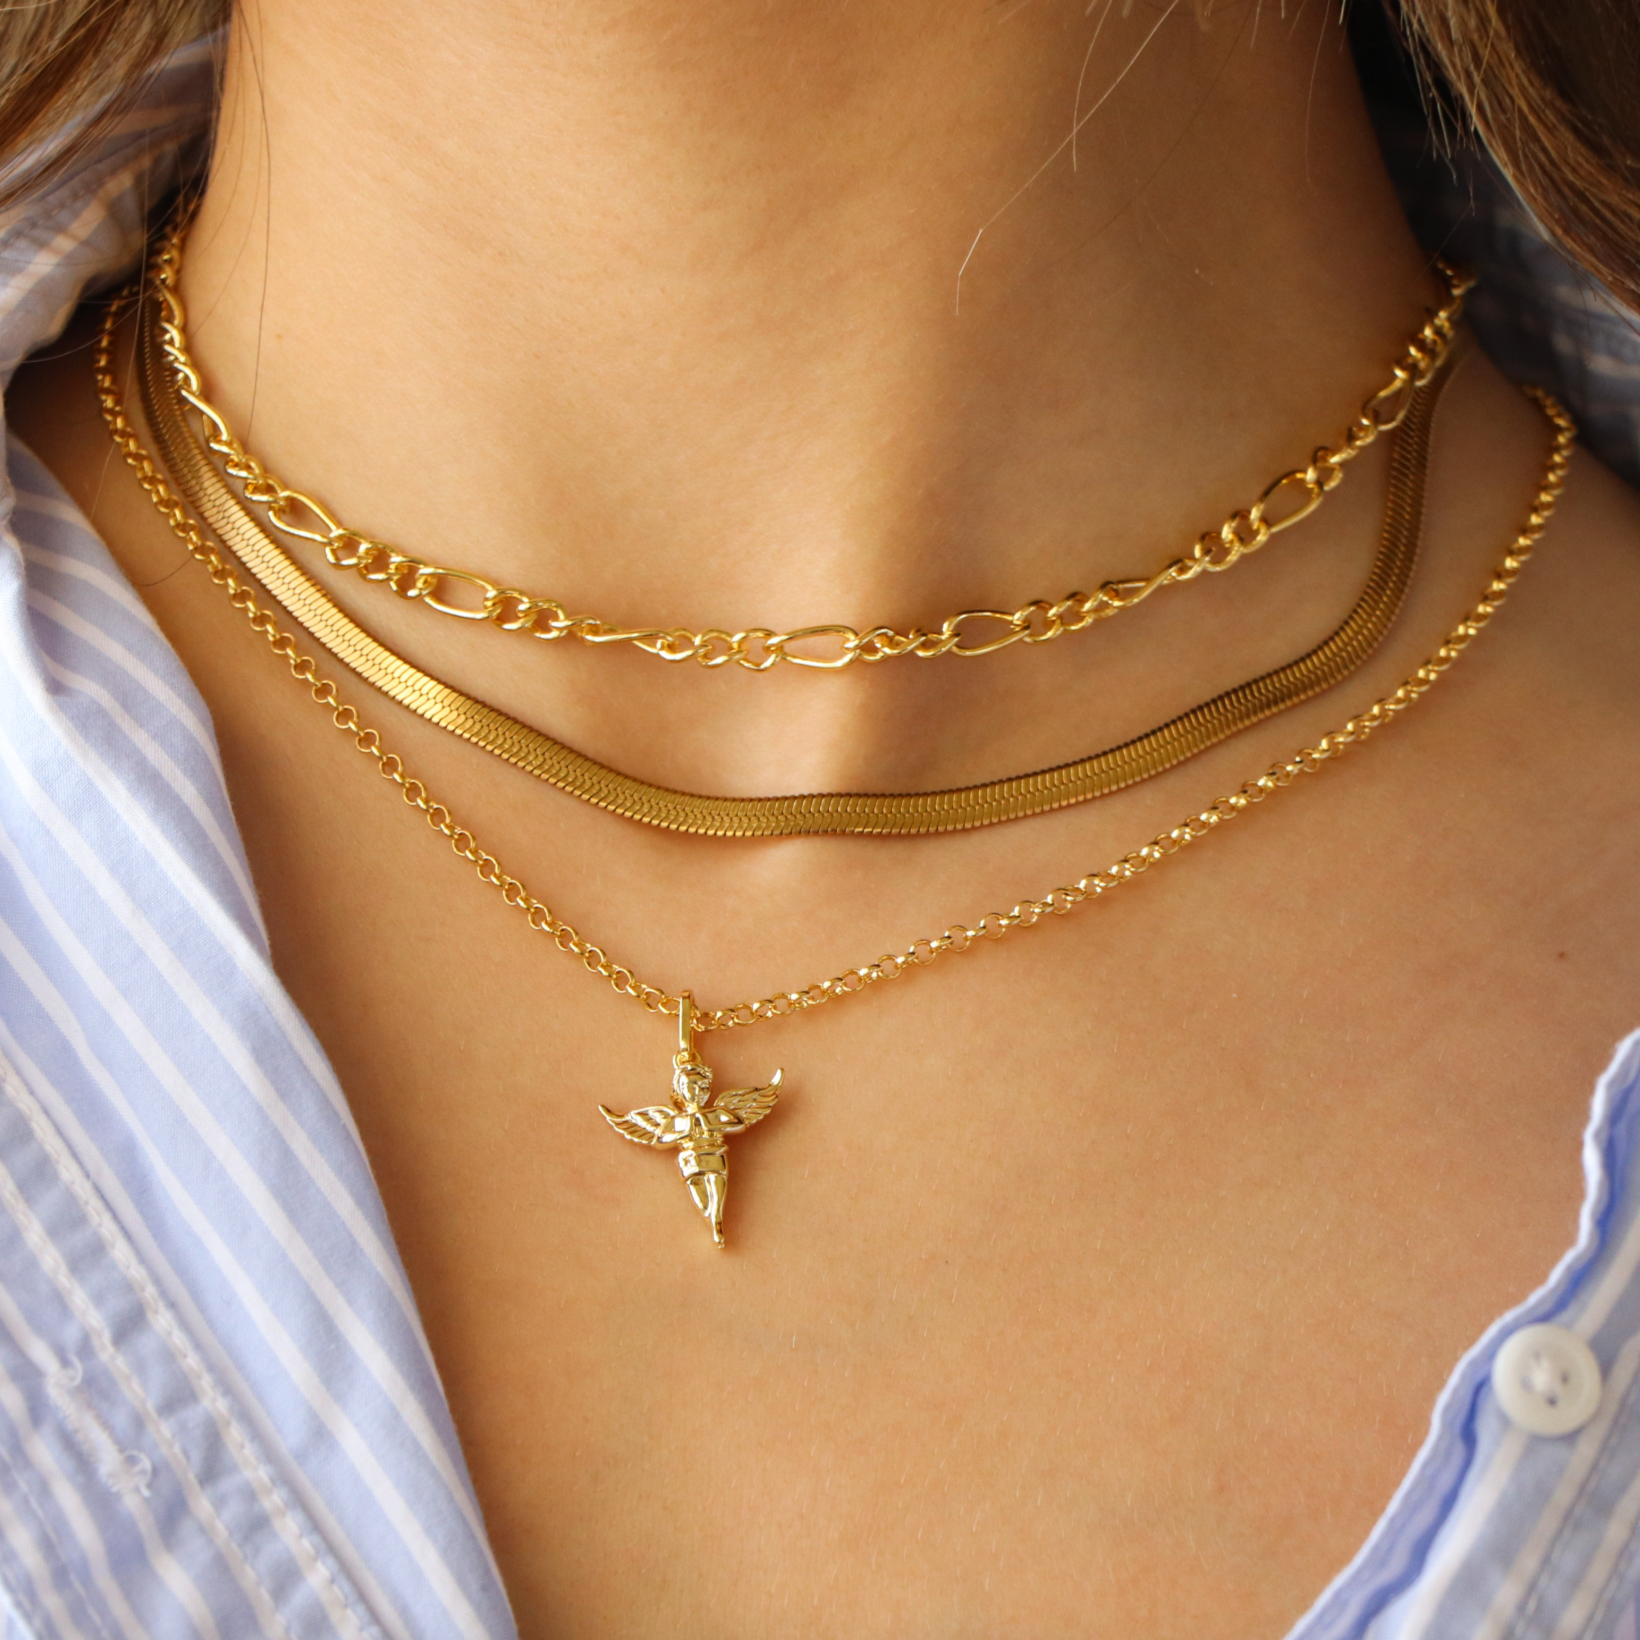 Angel Pendant Necklace - 14K Gold Plated Angel Necklace, Guardian - Women,  Girl